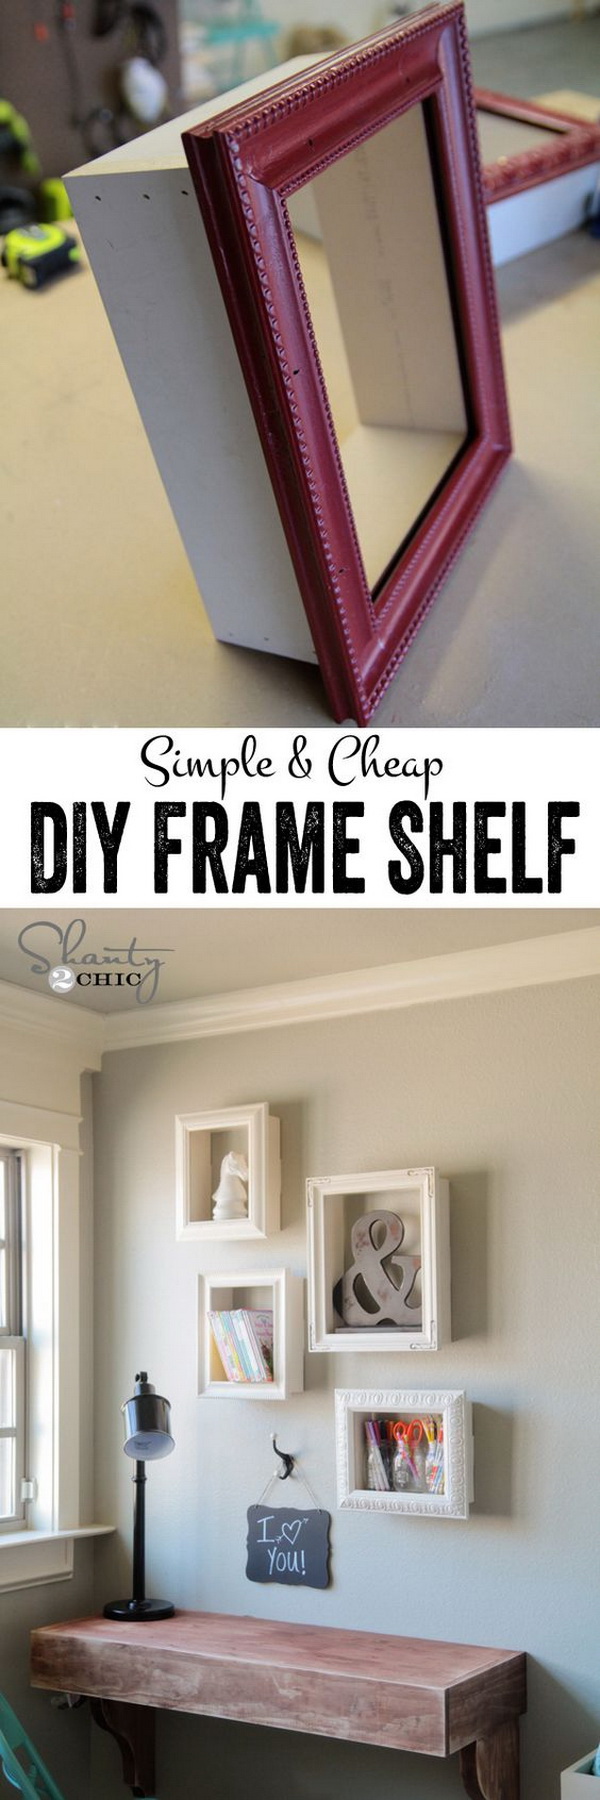 DIY Frame Shelves. Recycle the old frames into these creative shelves for display or storage!